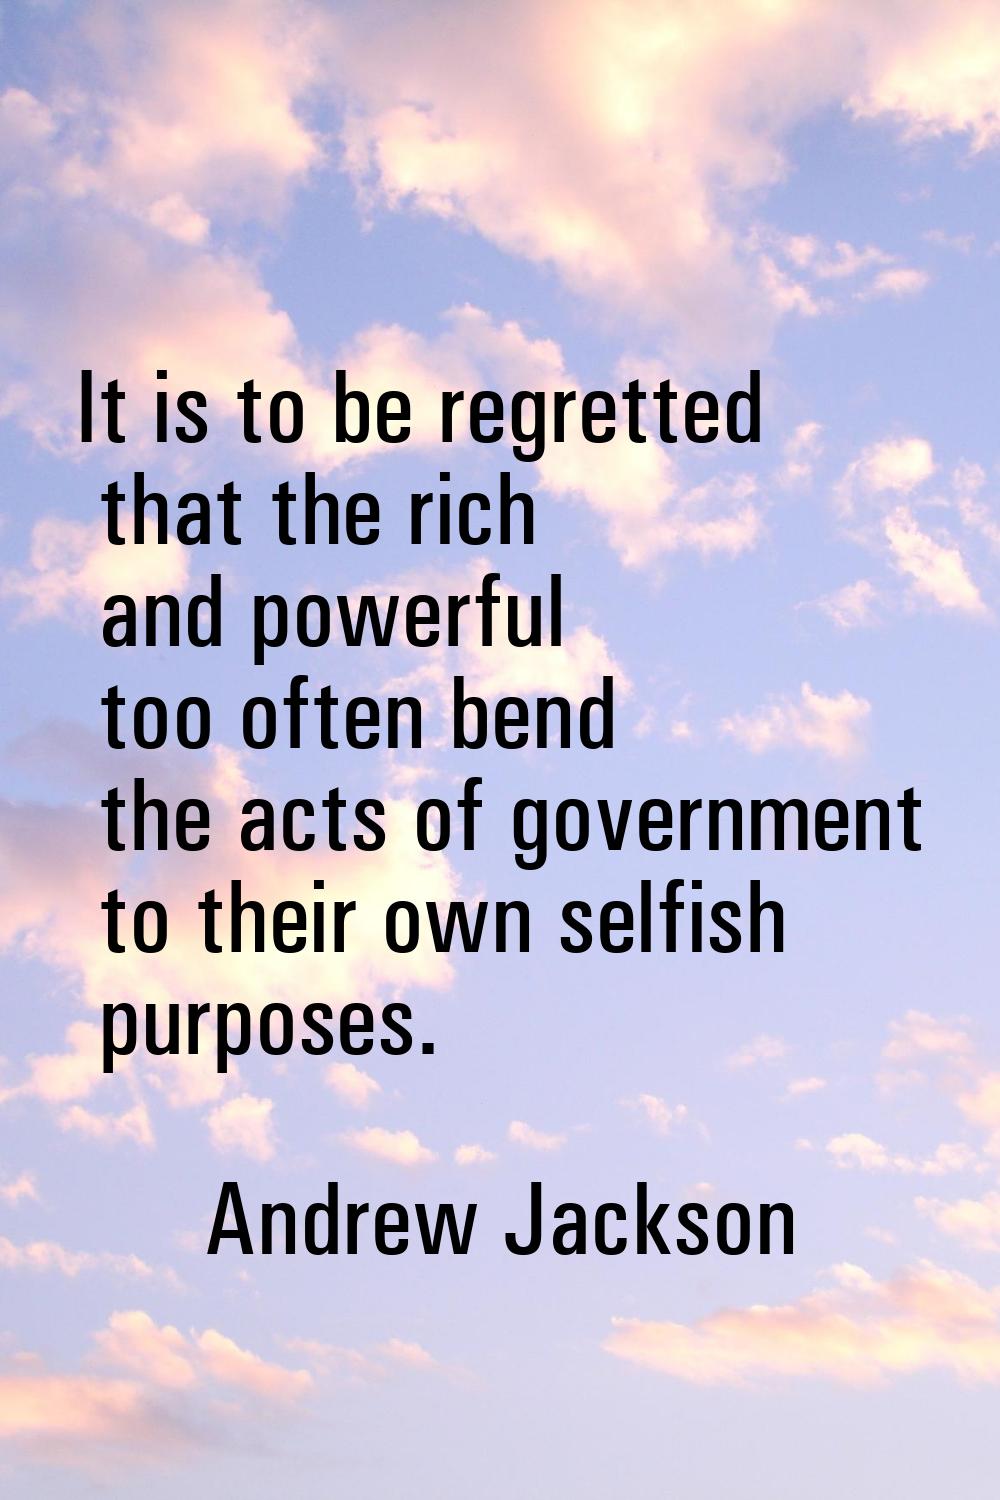 It is to be regretted that the rich and powerful too often bend the acts of government to their own